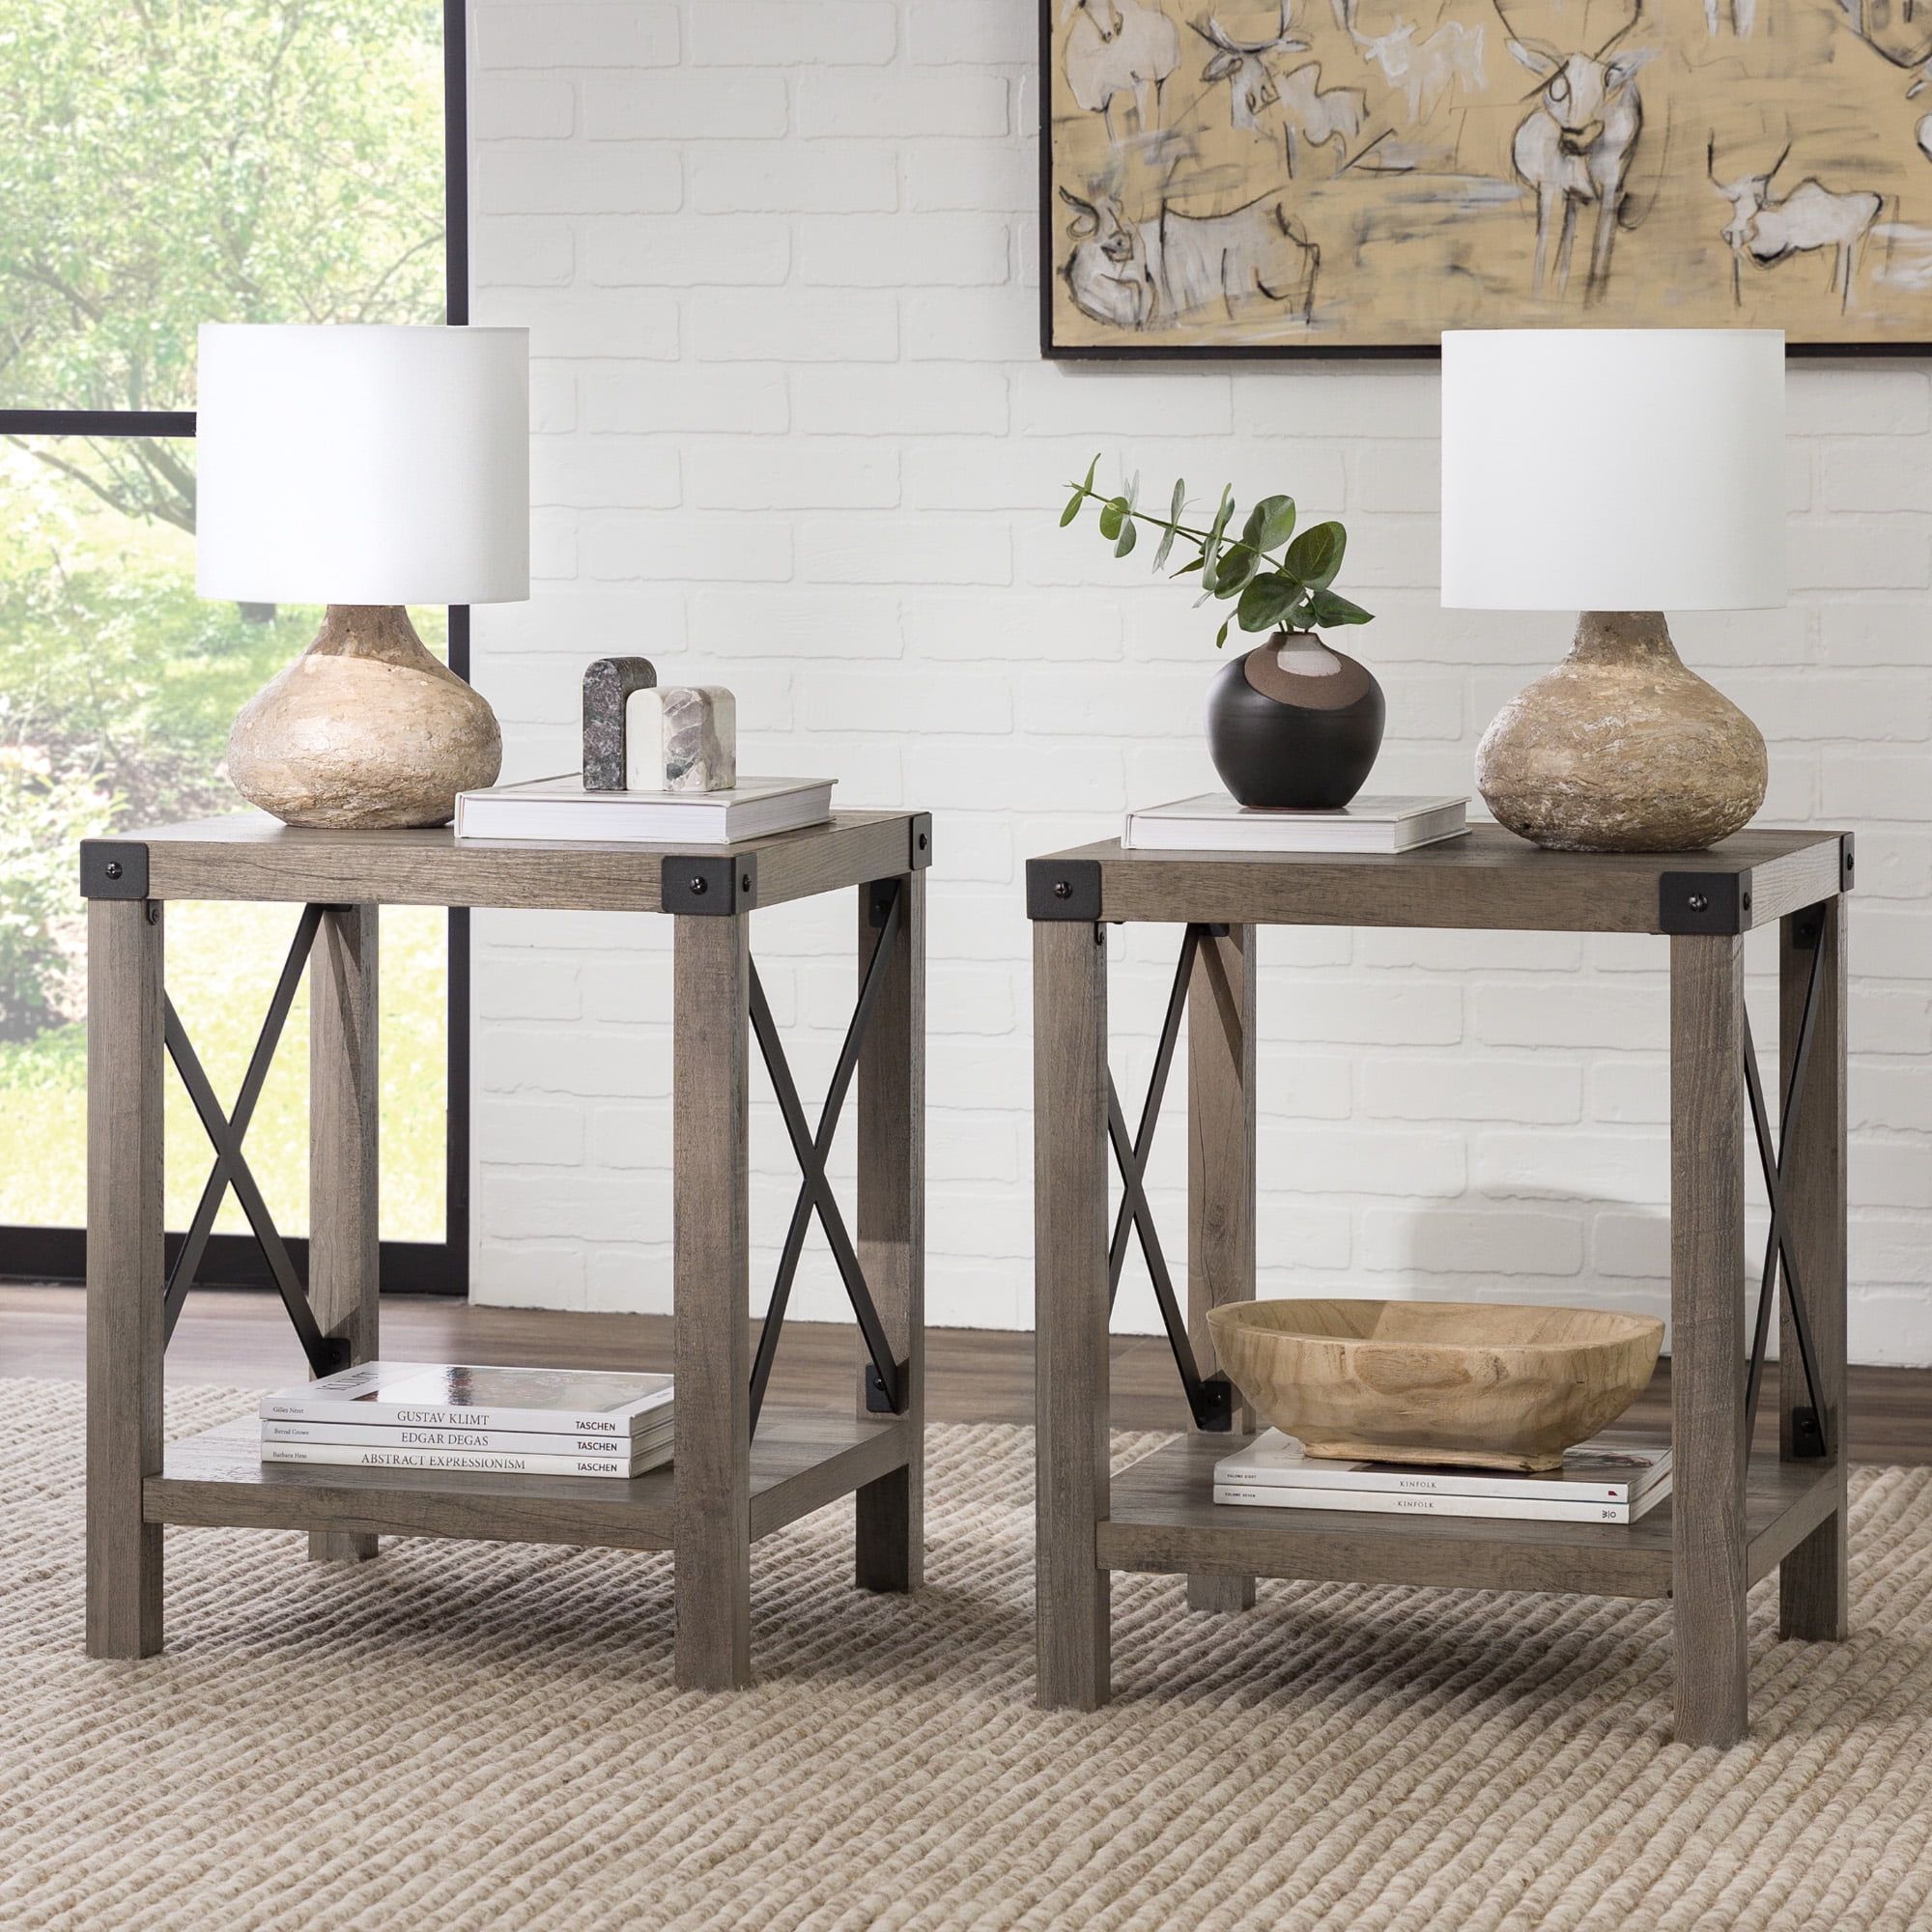 Woven Paths Magnolia Metal X Set Of 2 End Tables, Grey Wash – Walmart In Rustic Gray End Tables (Photo 6 of 15)